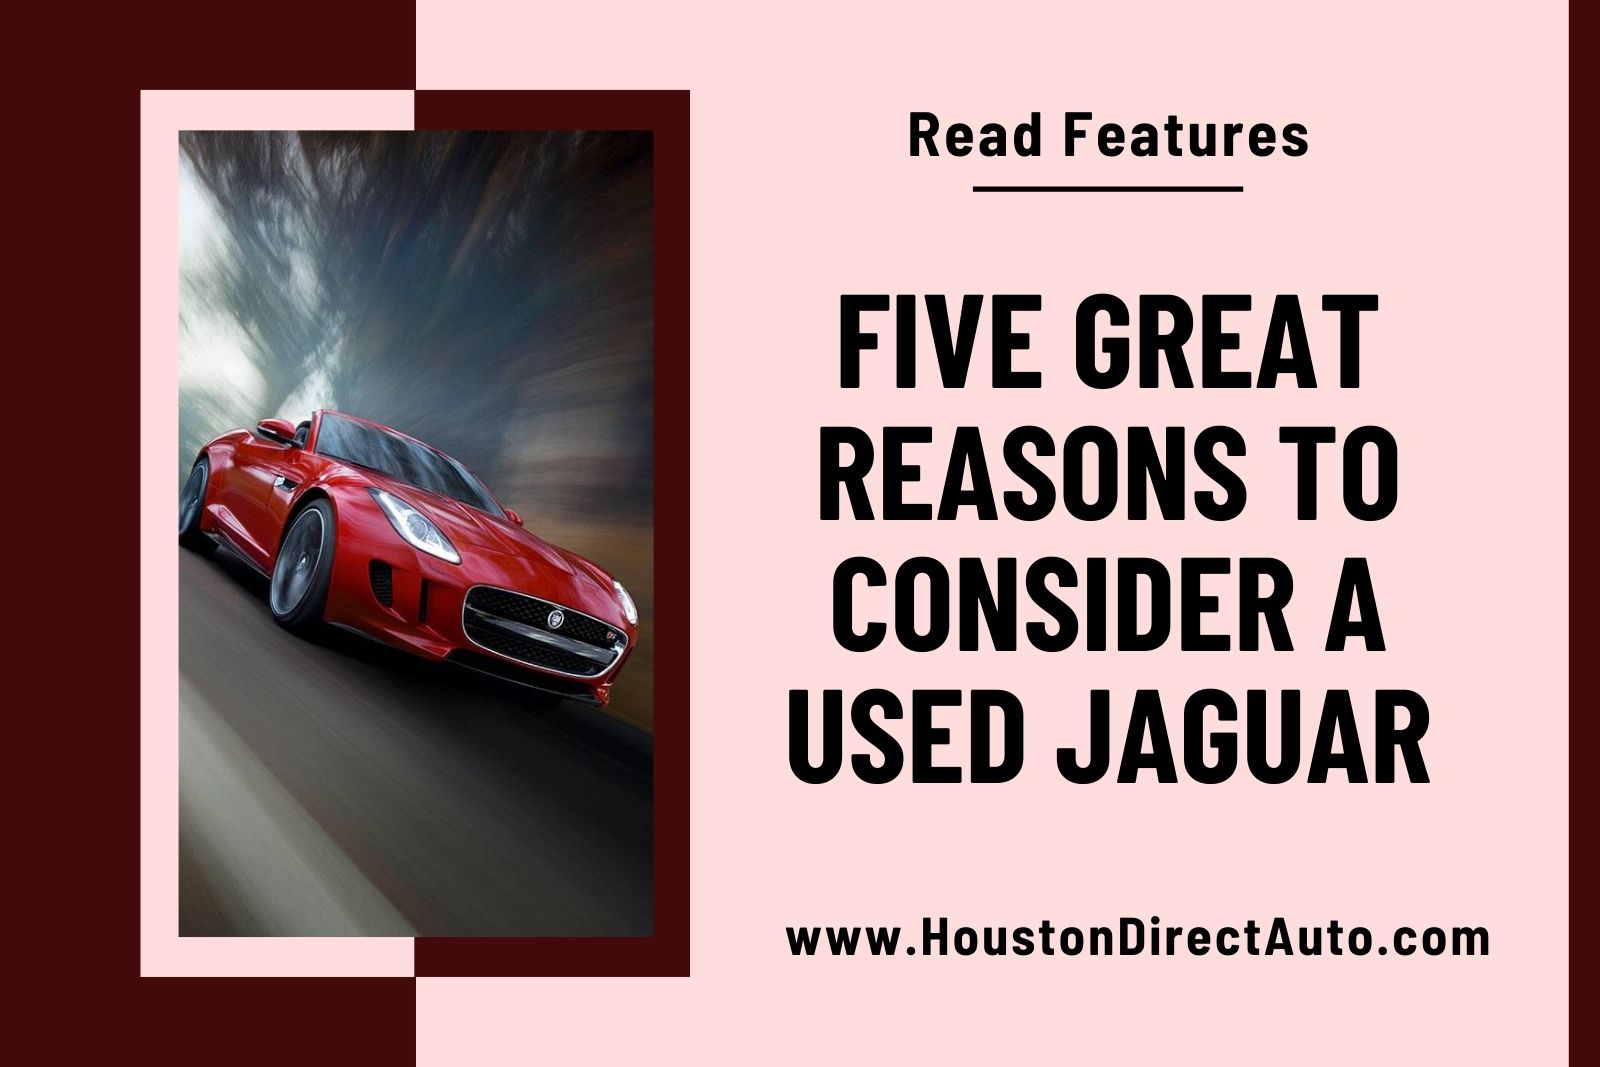 Five Great Reasons To Consider A Used Jaguar